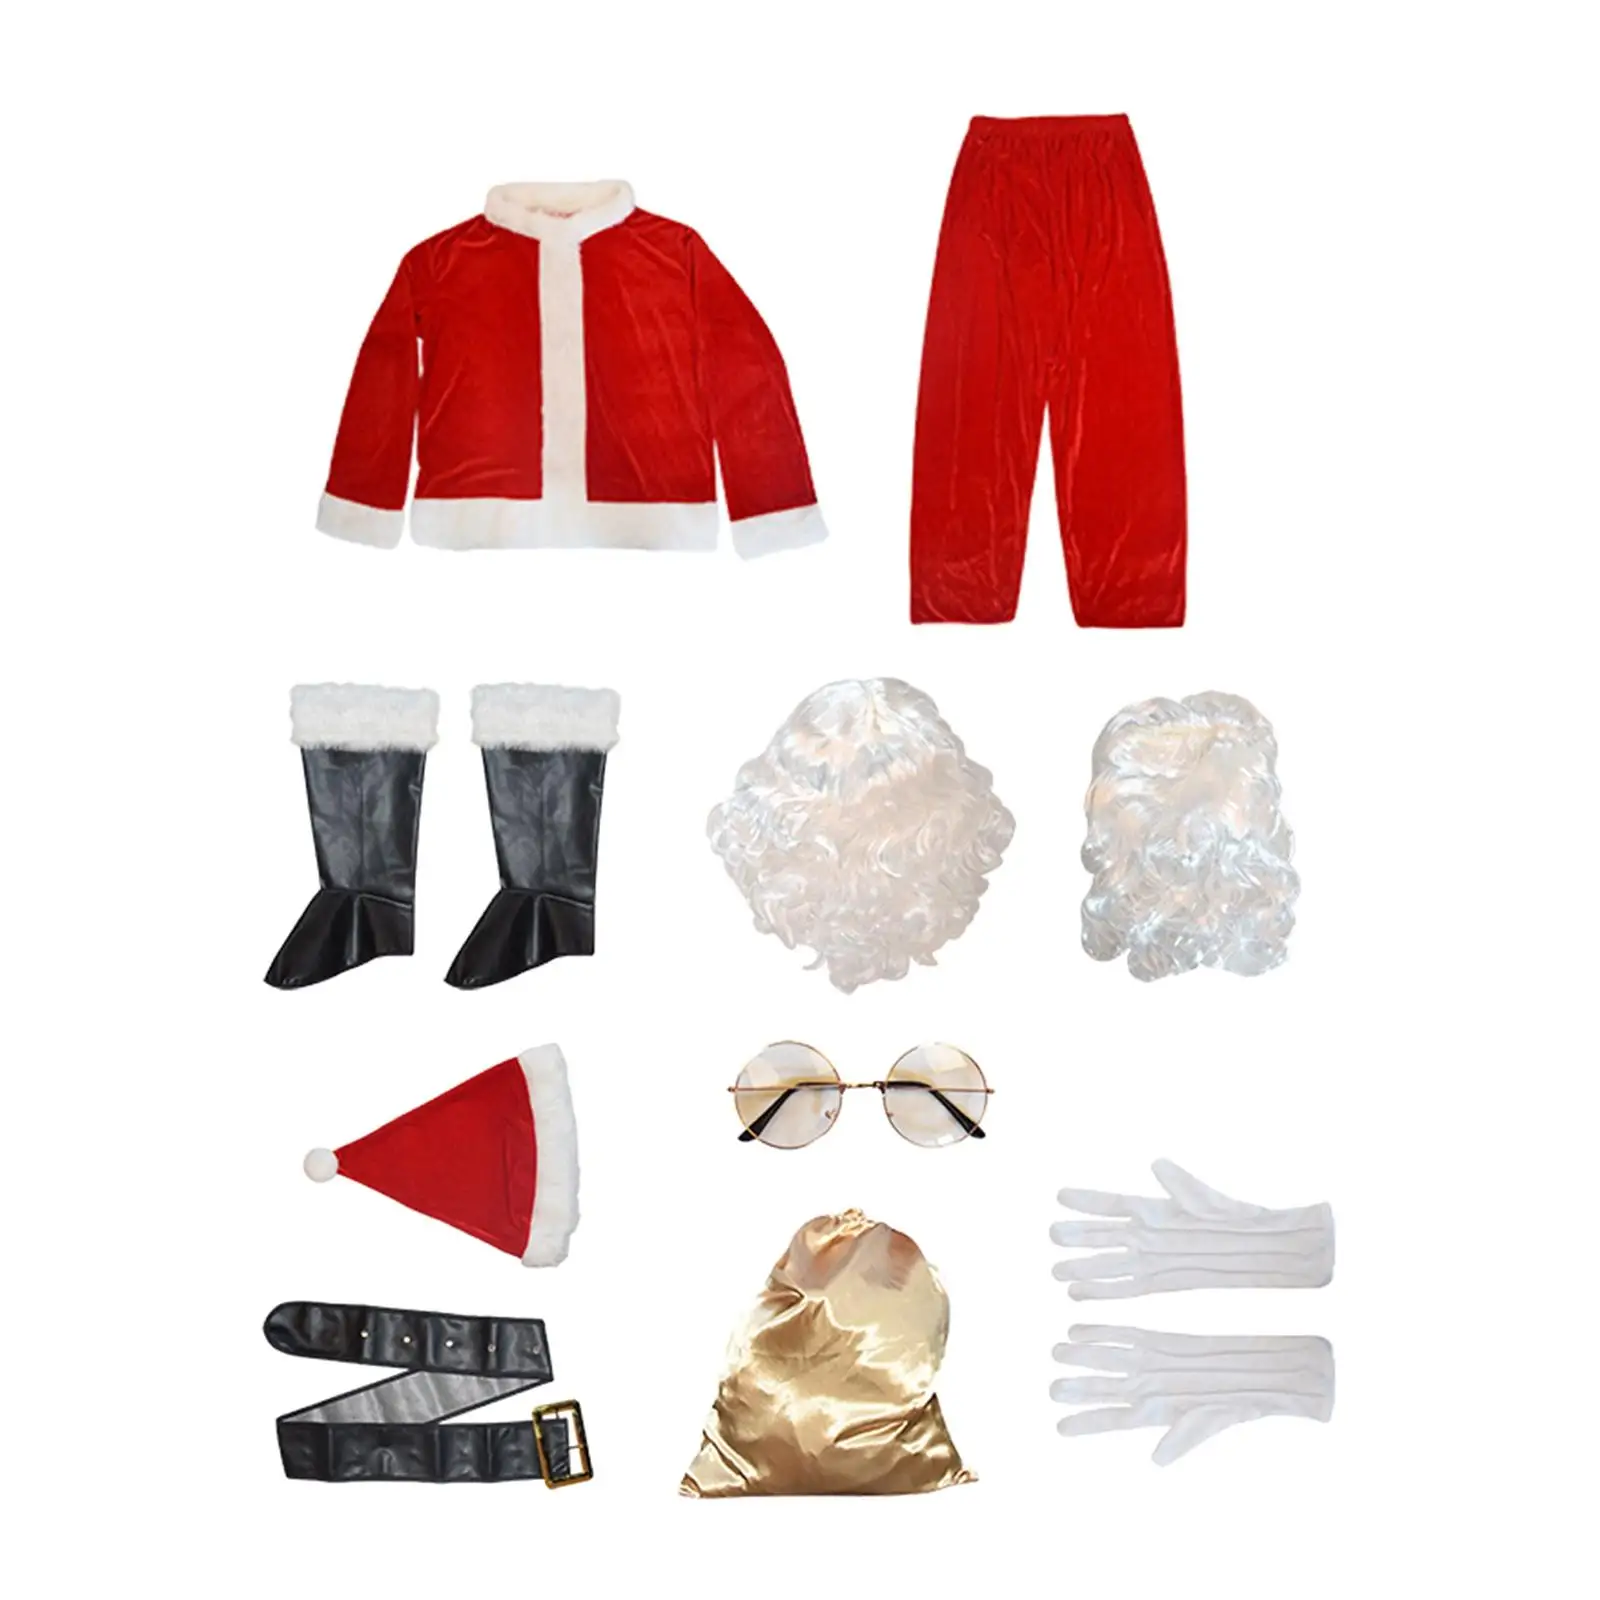 10Pcs Santa Claus Costume Wig Glasses Xmas suits Set Christmas Clause Outfit for Holidays Xmas Clothing Accessory Carnival Party